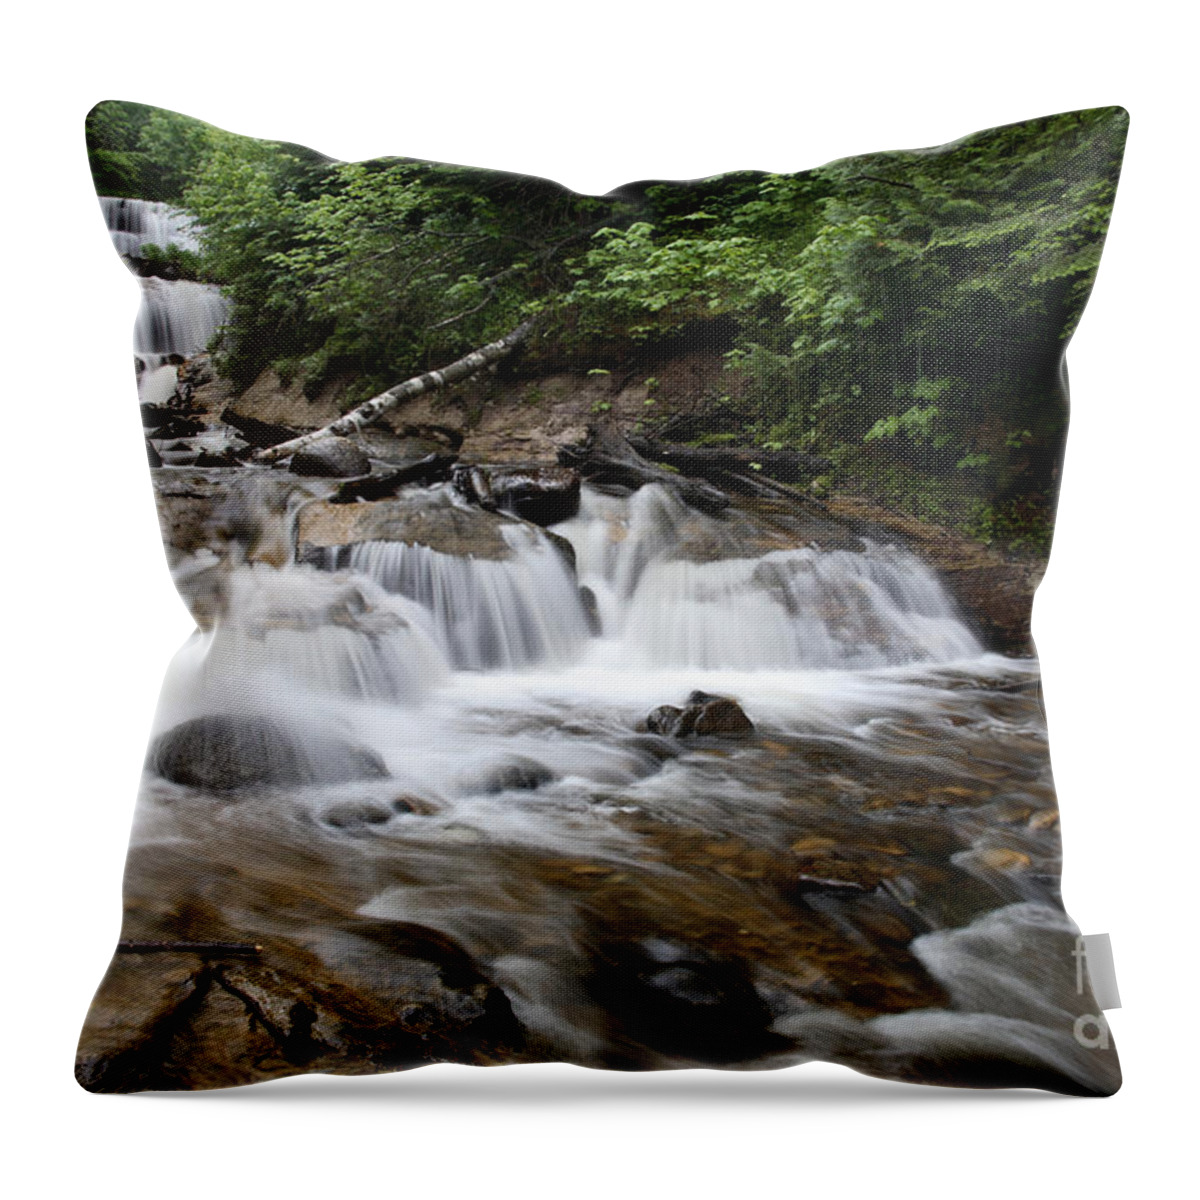 National Park Throw Pillow featuring the photograph Michigan Waterfall by Ted Kinsman